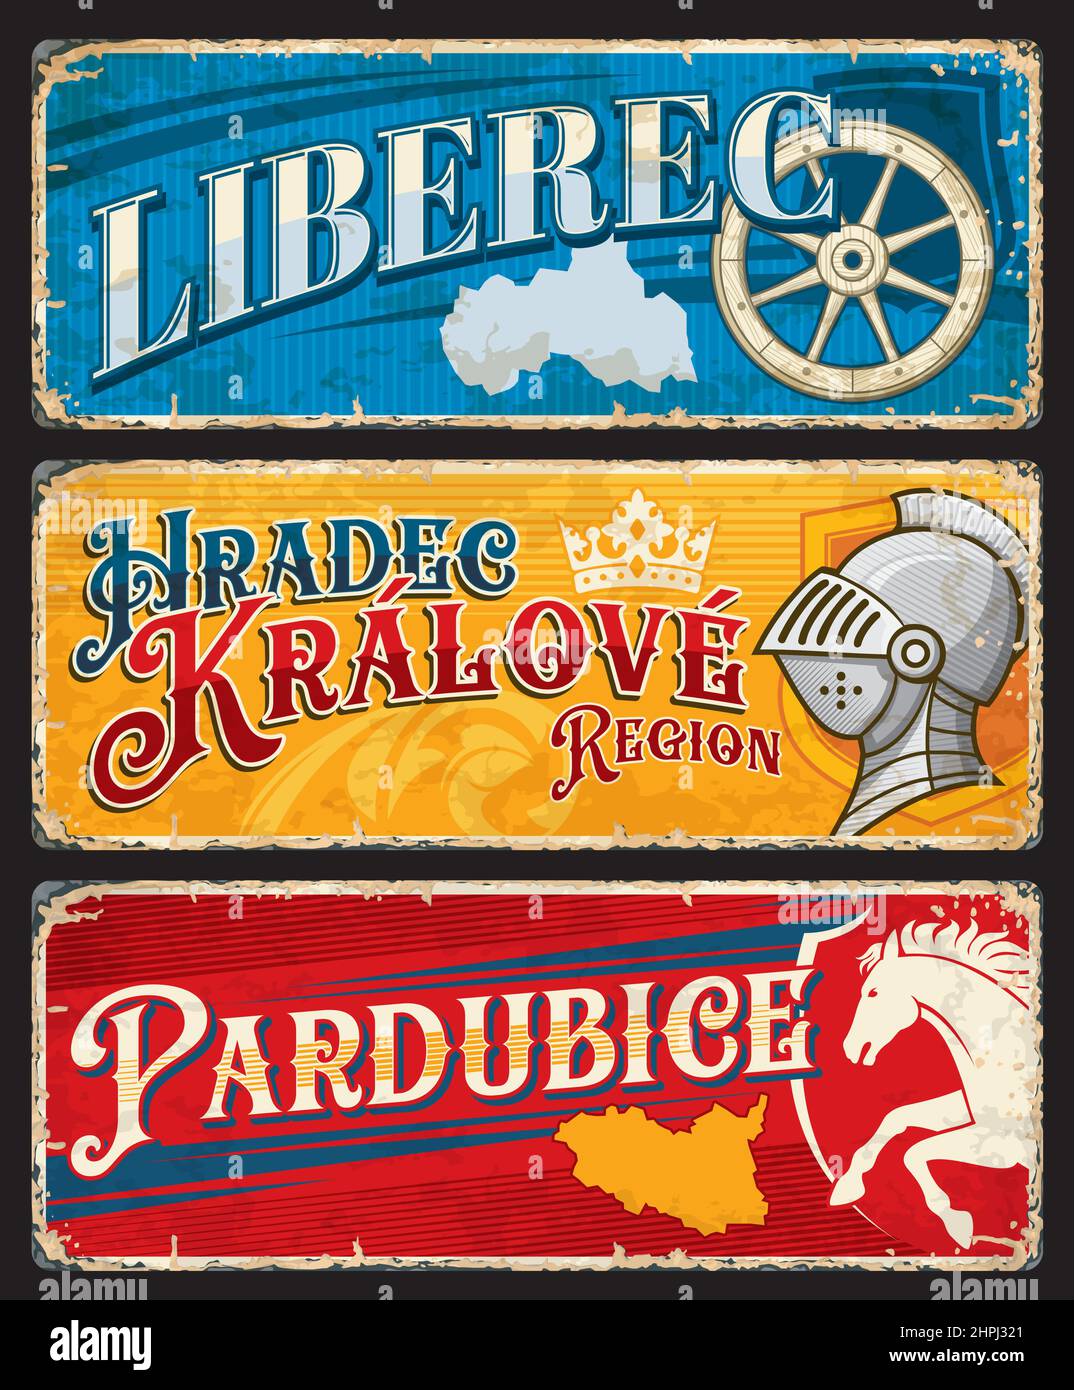 Pardubice, Hradec Kravole, Liberez czech regions plates and travel stickers. Vector vintage boards or plaques, touristic banners with heraldic shield, Stock Vector